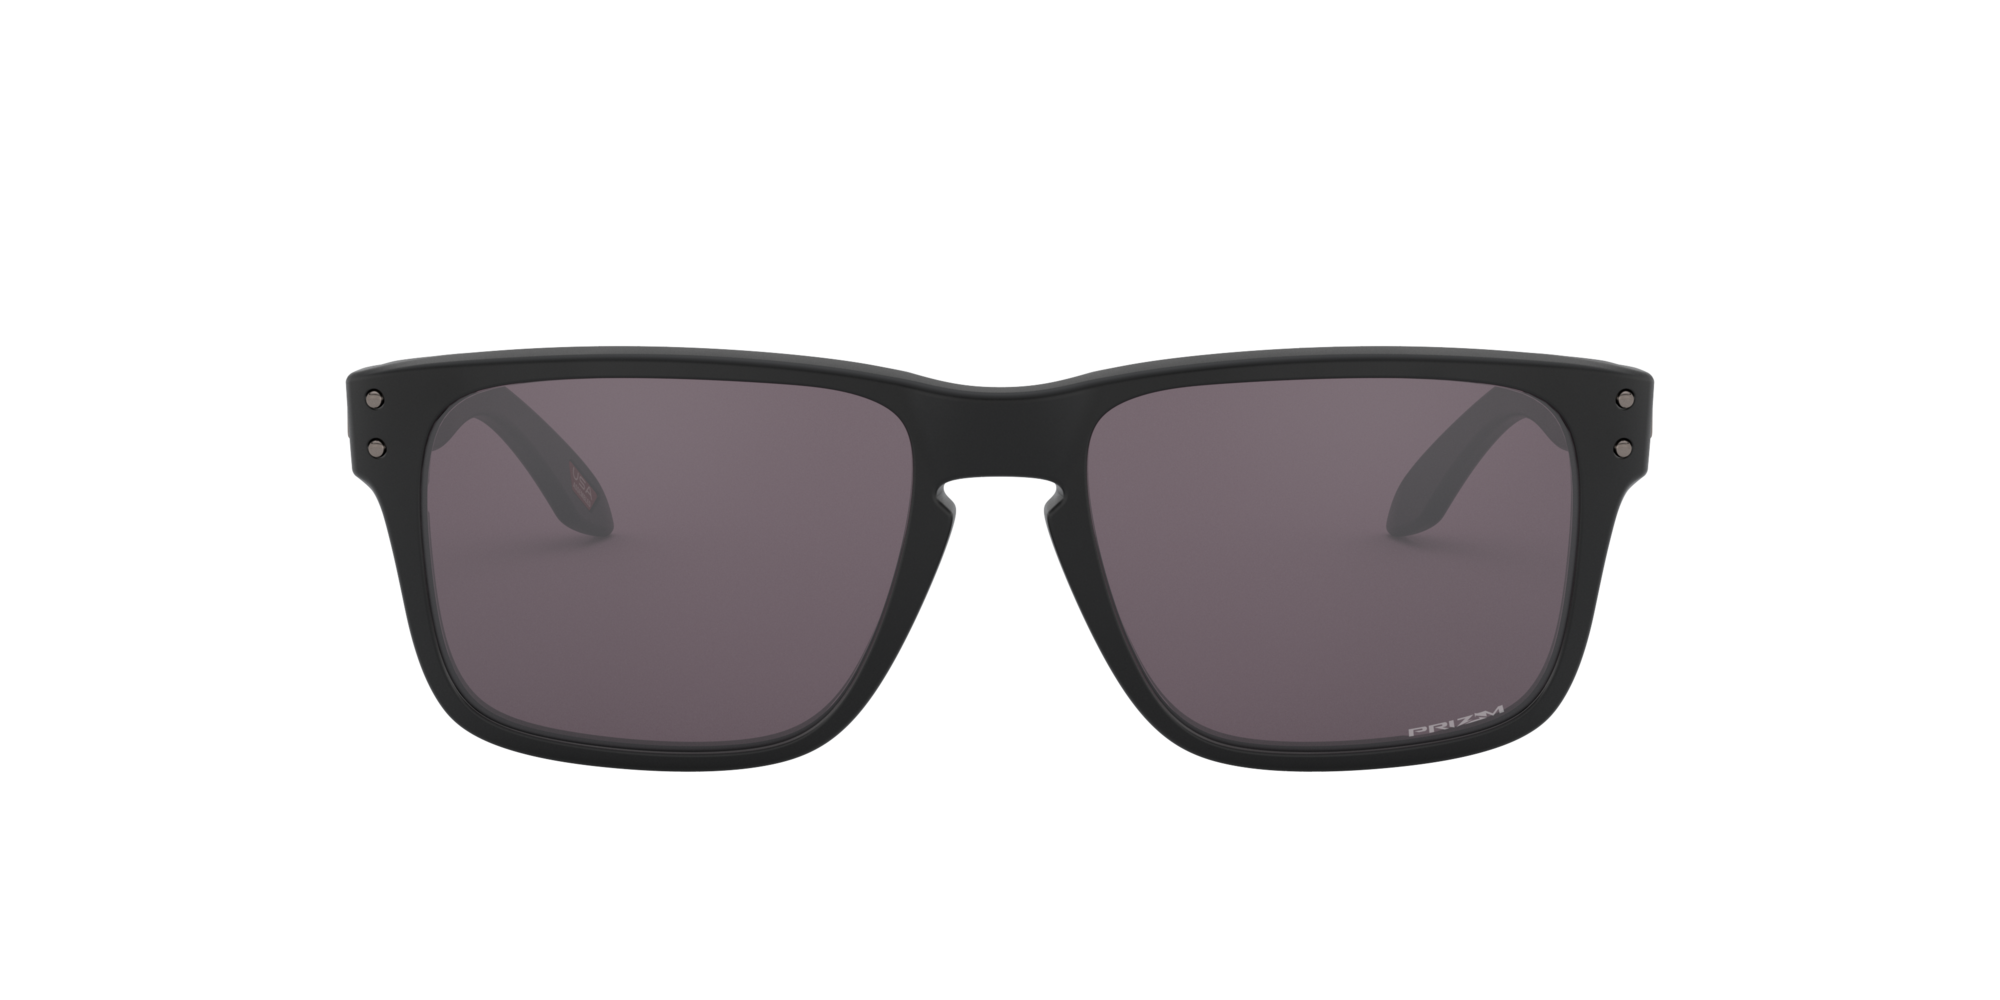 [products.image.front] OAKLEY OJ9007 900709